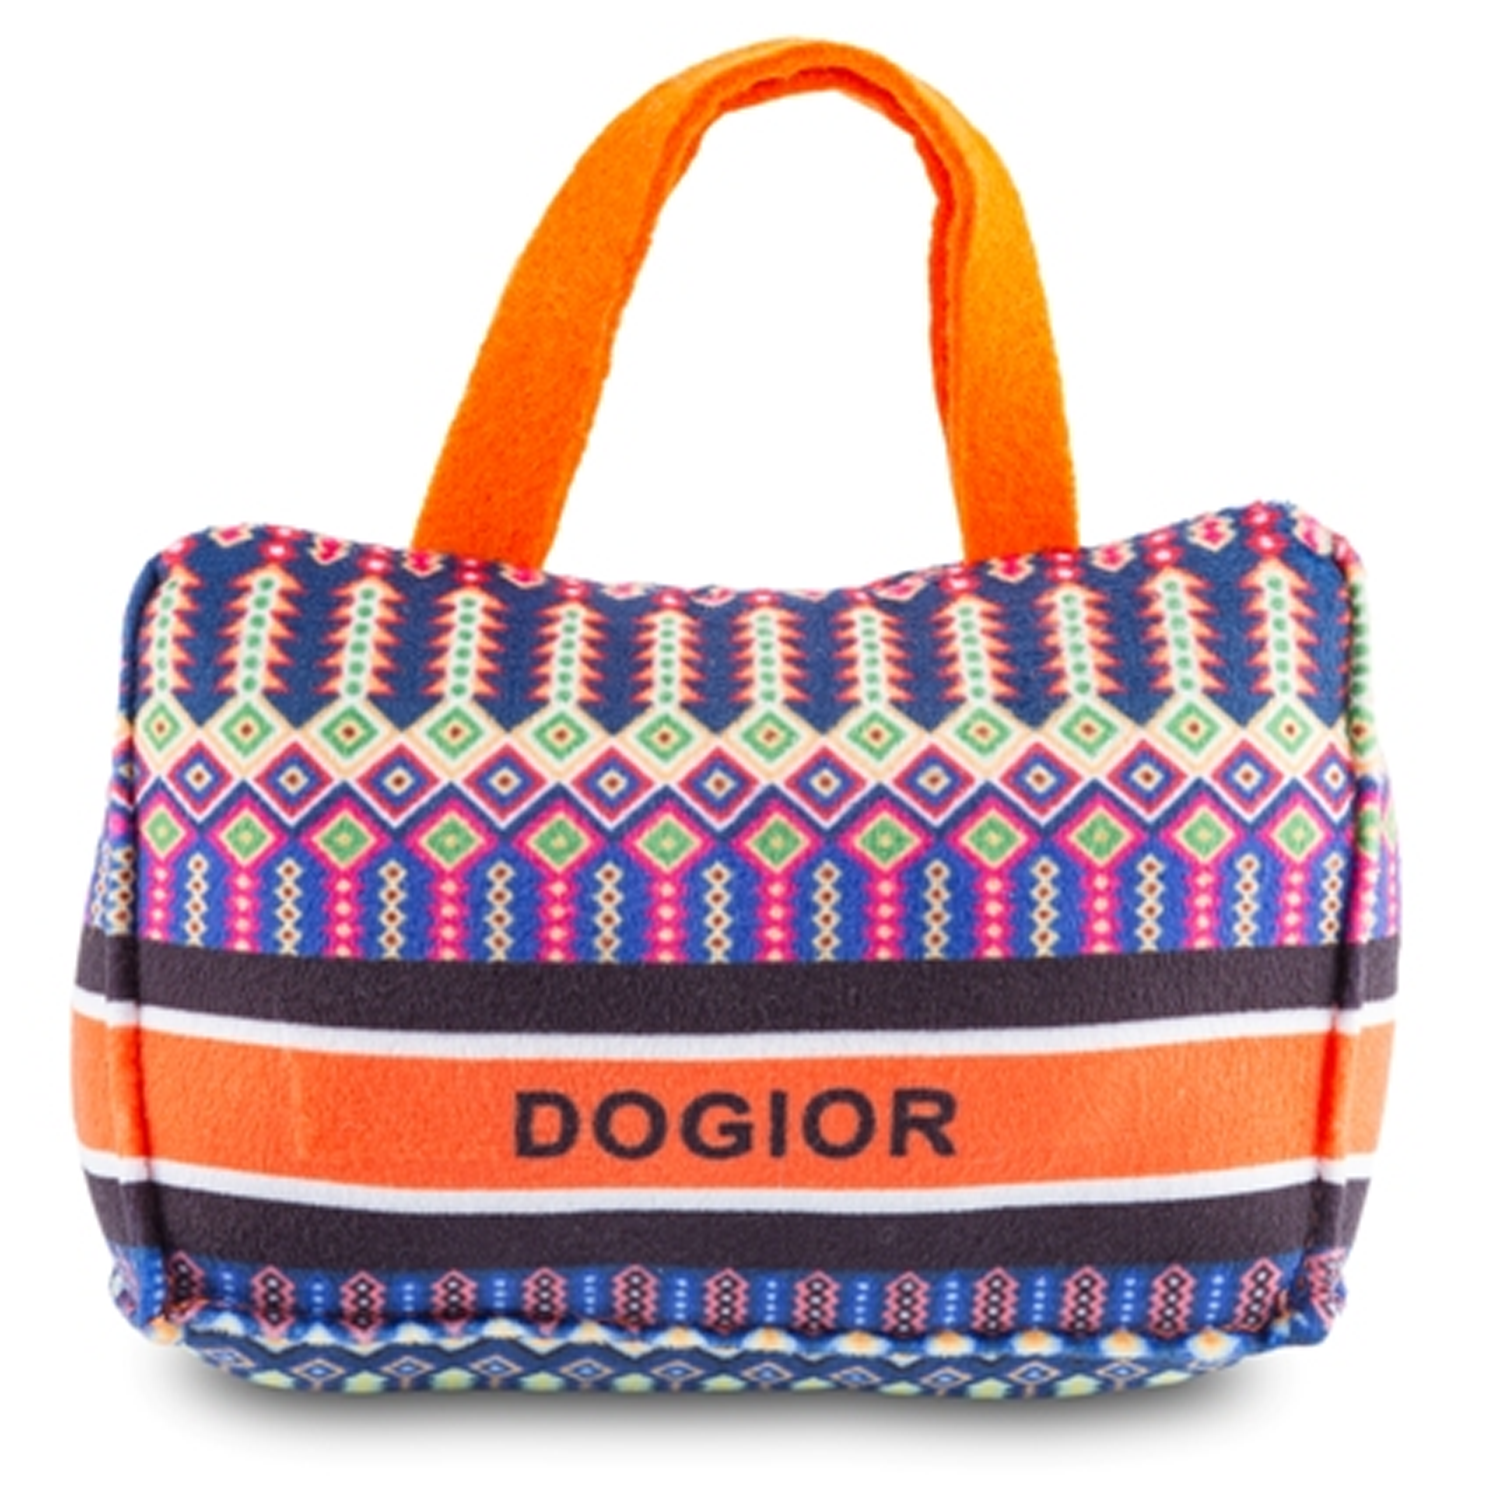 Dog Toys - Dogior Bark Tote Dog Toy by Haute Diggity Dog